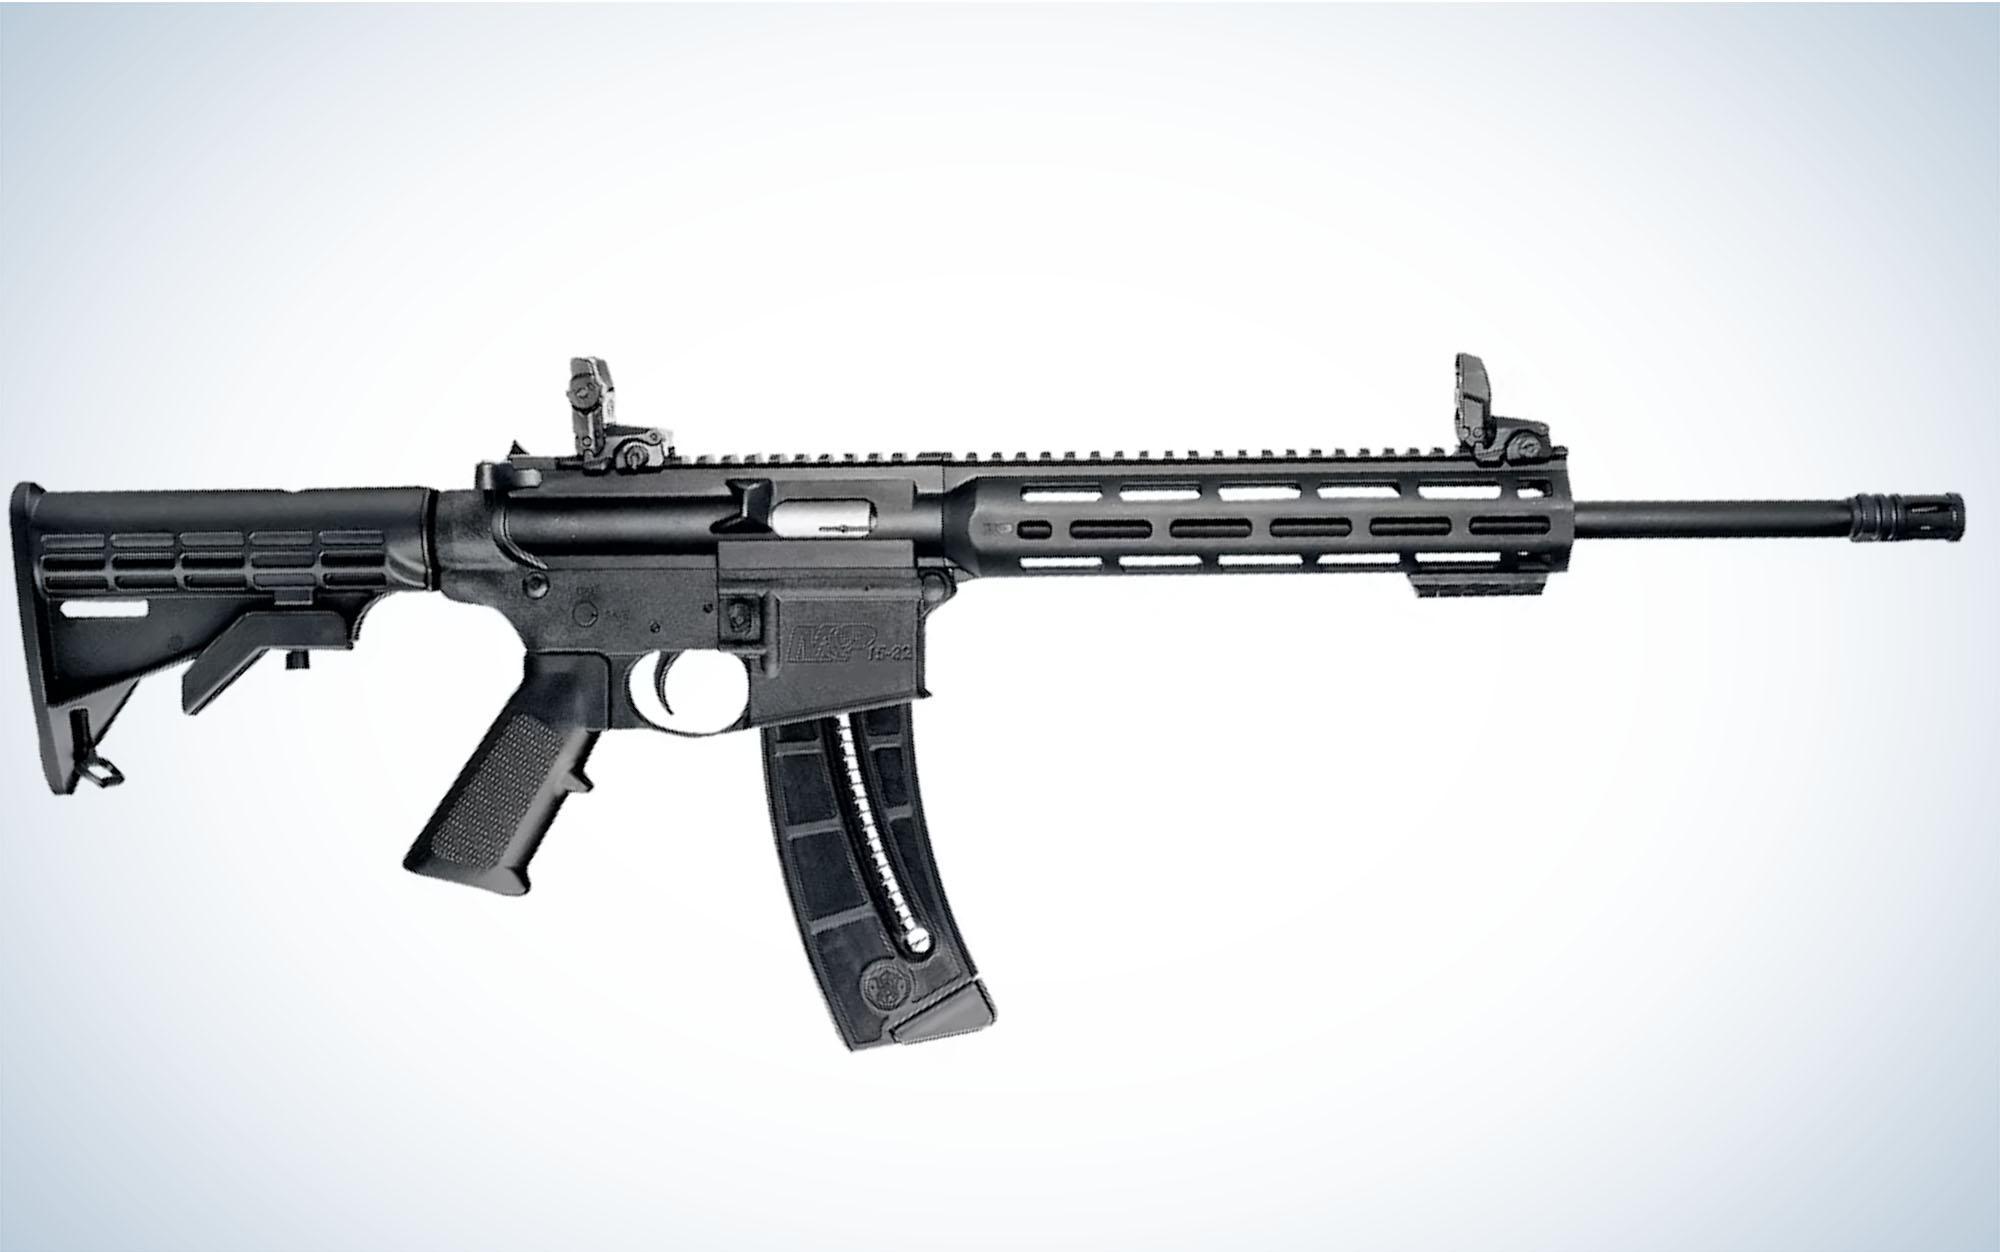 The Smith & Wesson M&P 15-22 Sport is the best AR-style rimfire.